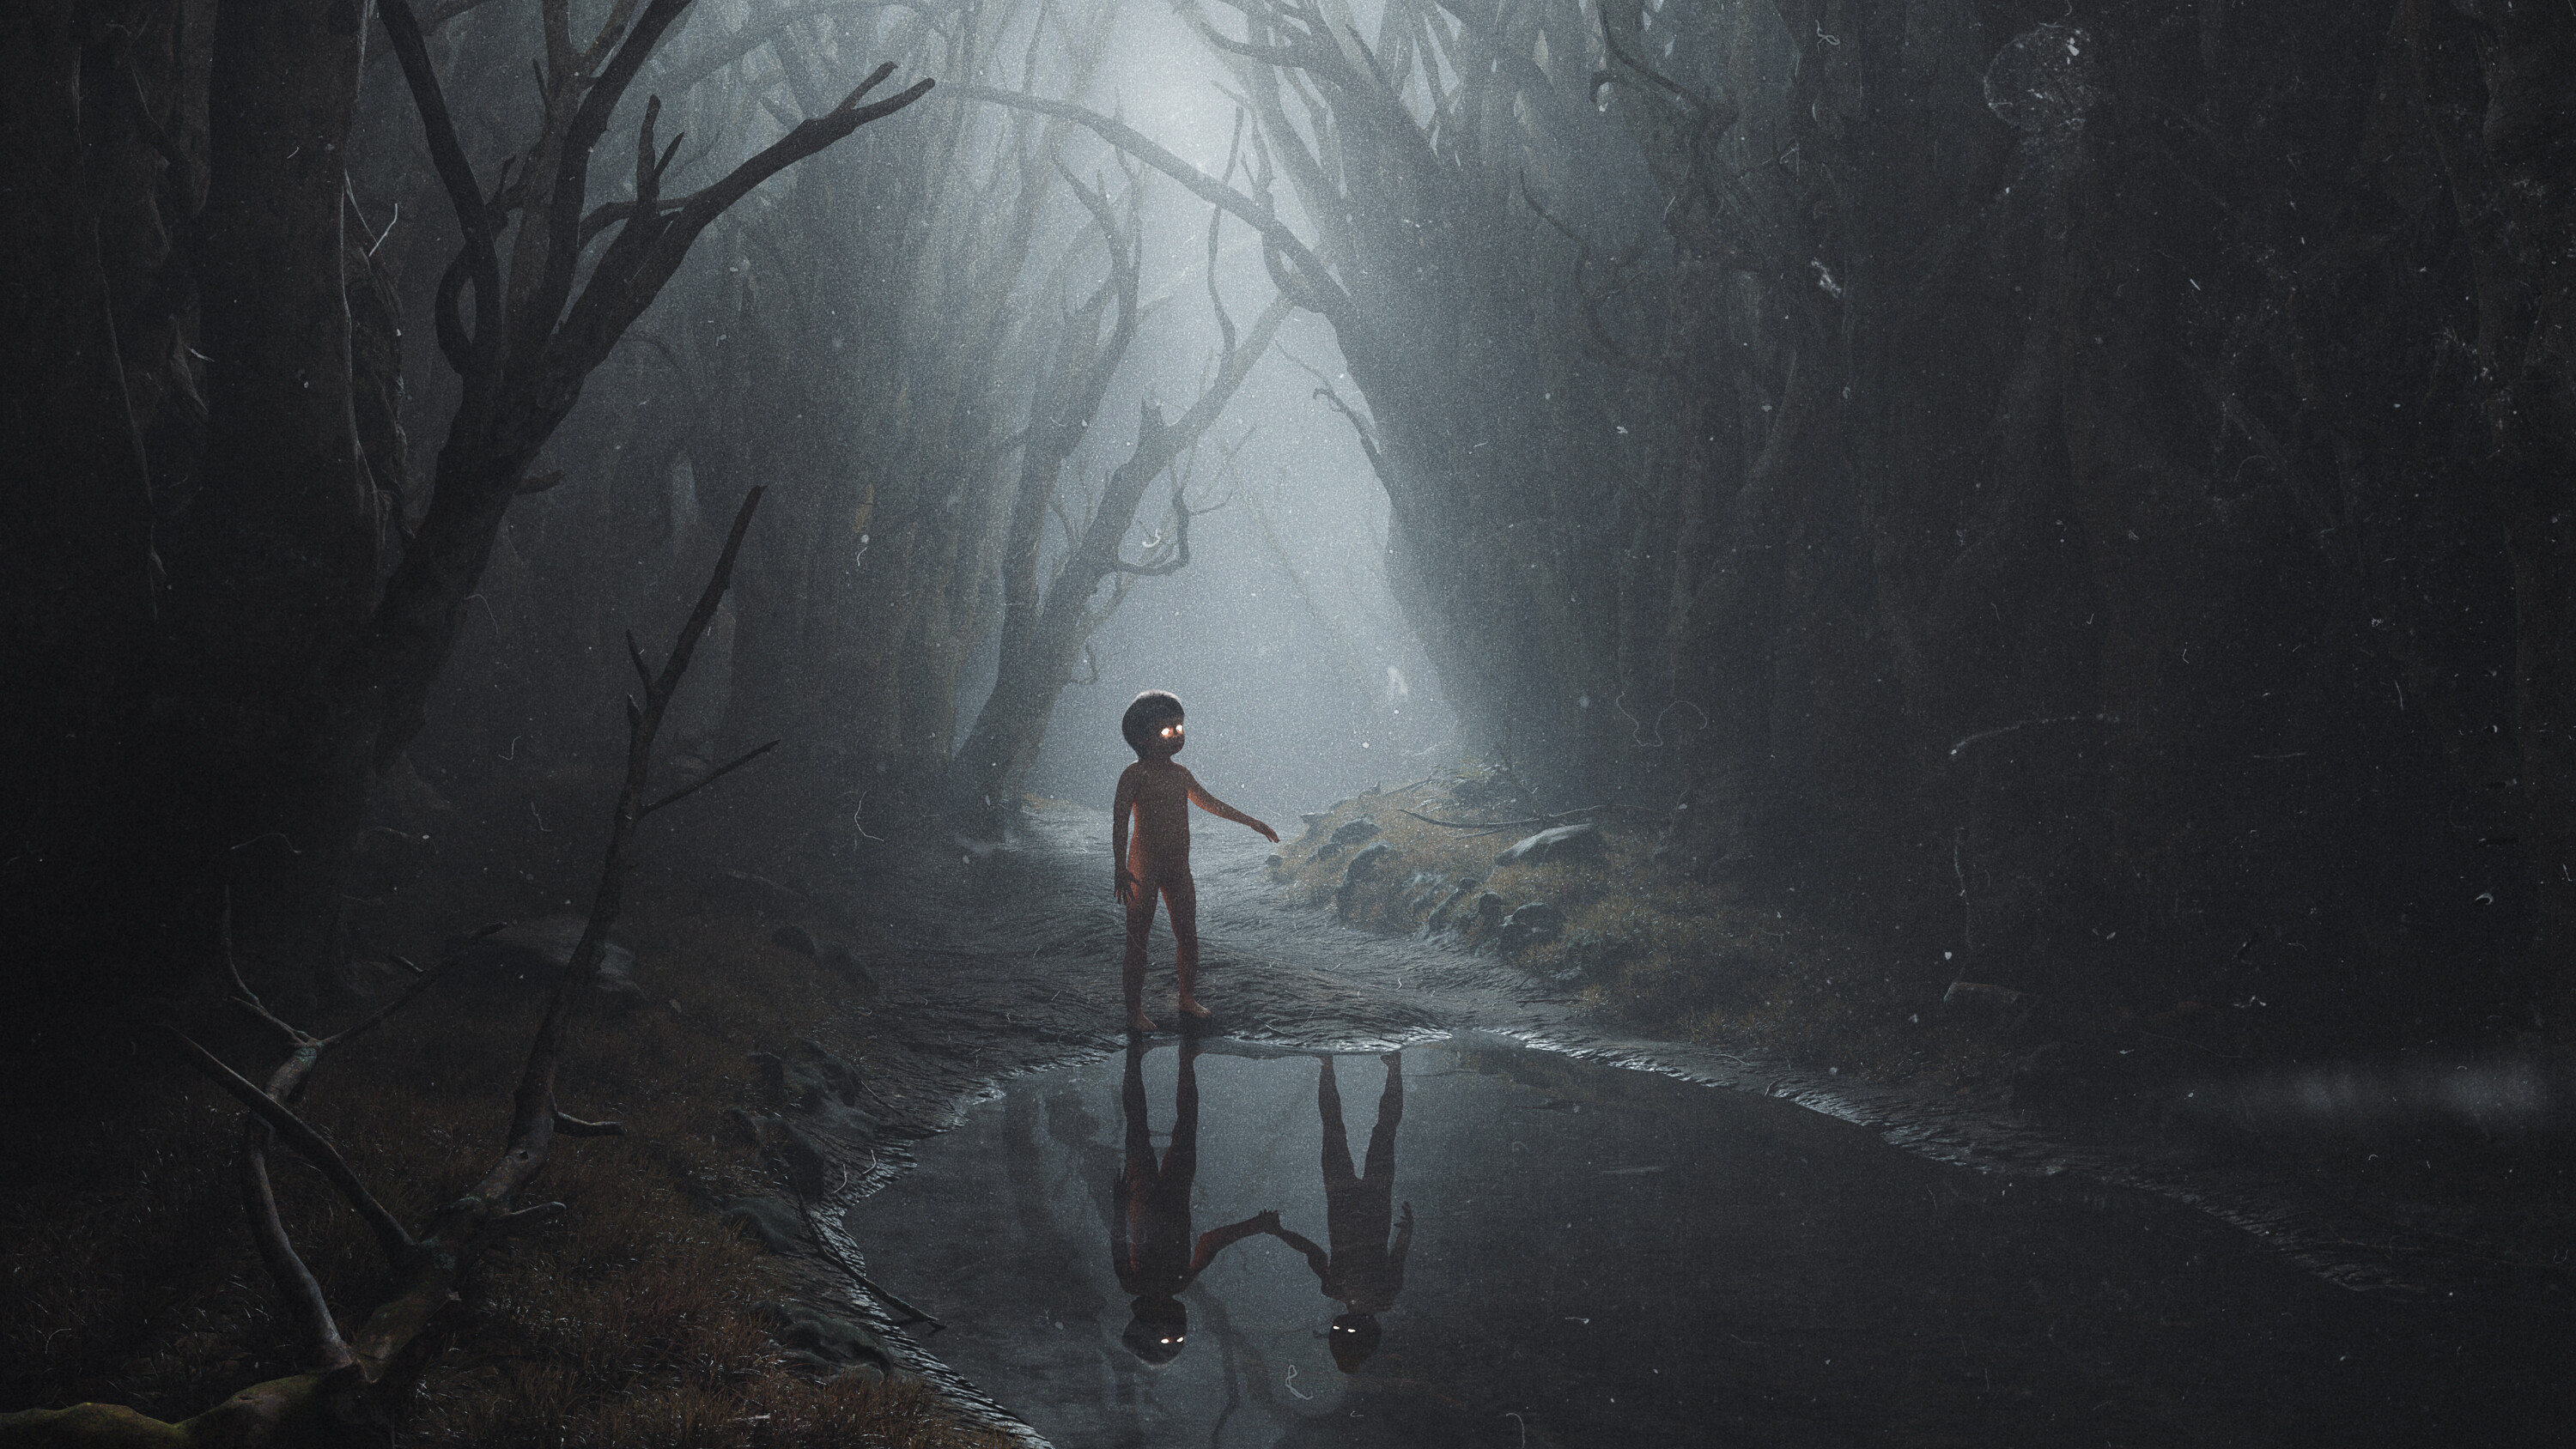 General 3000x1688 forest reflection puddle mist water standing trees children digital art creepy low light